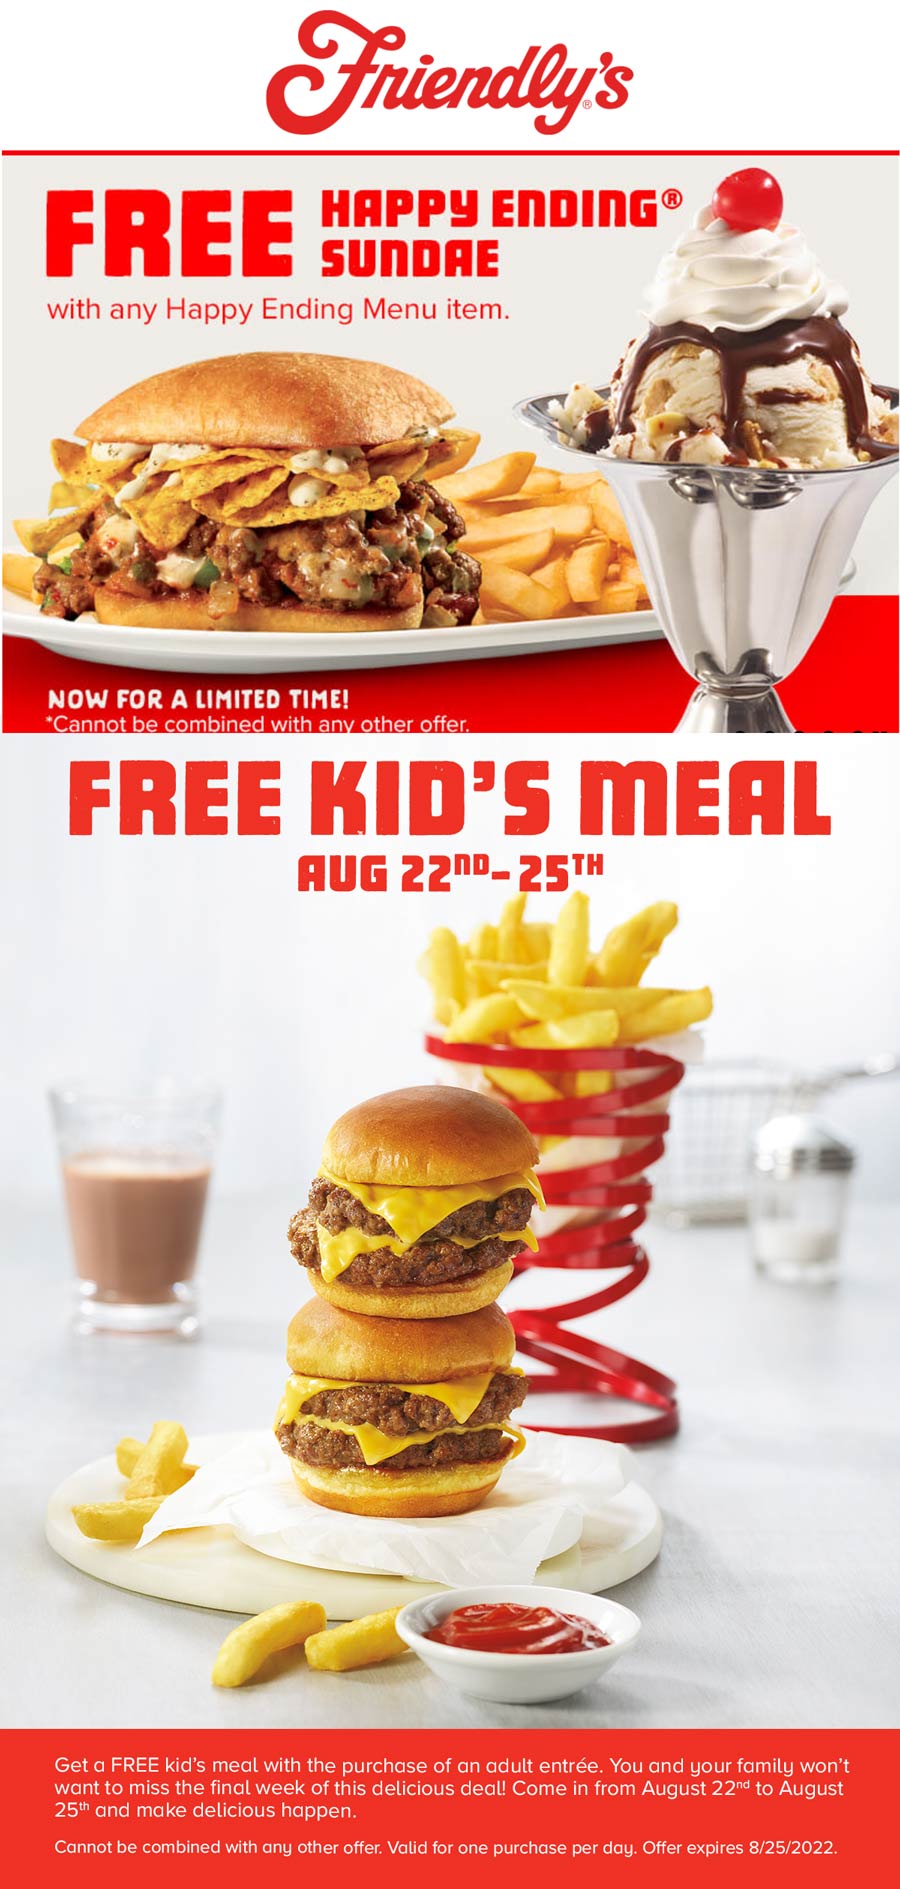 Friendlys restaurants Coupon  Free kids meal or sundae with your entree today at Friendlys #friendlys 